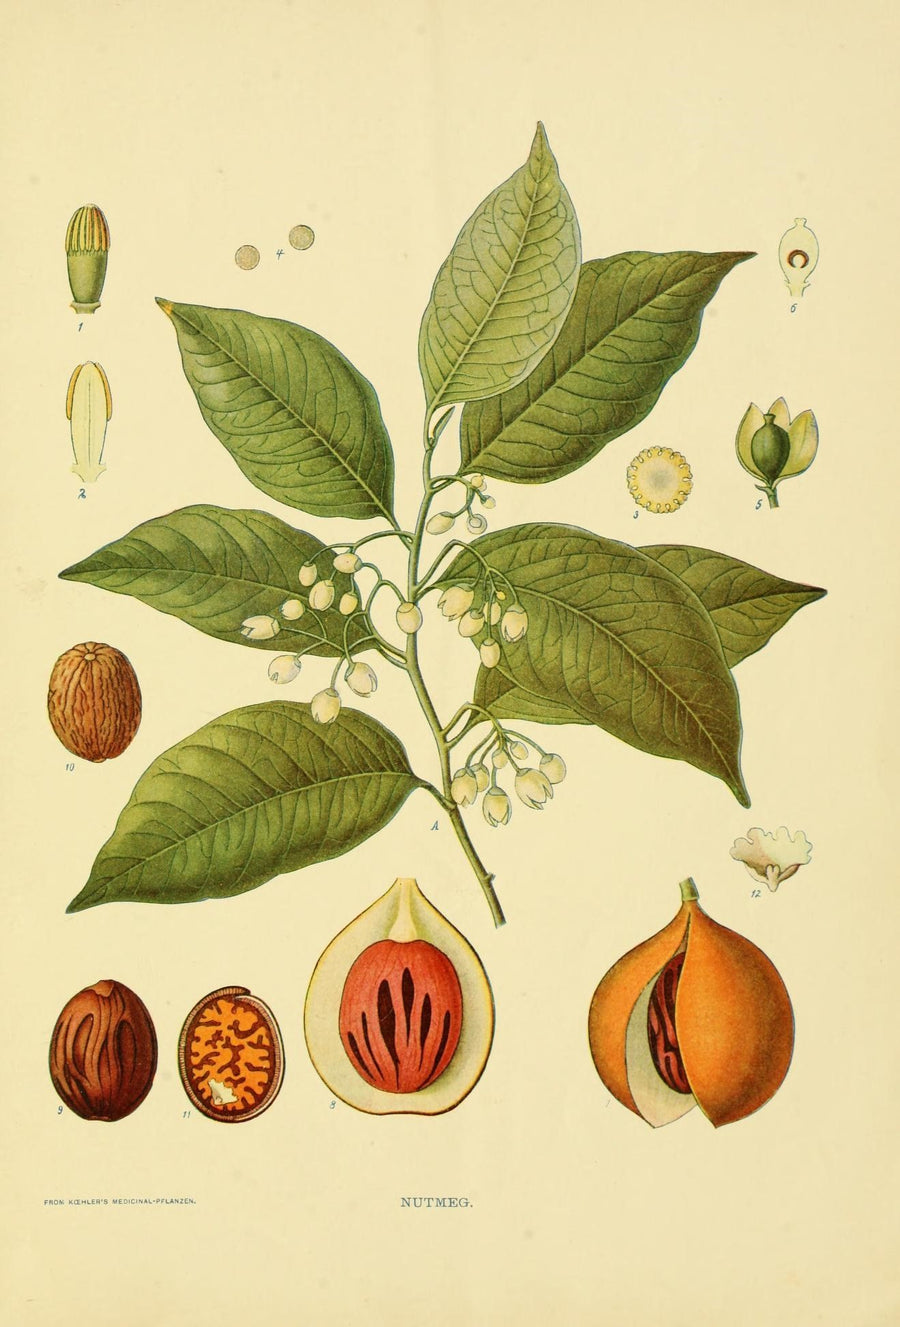 Fragrant Origins - Nutmeg: the tale of Blood, Sex and Empires